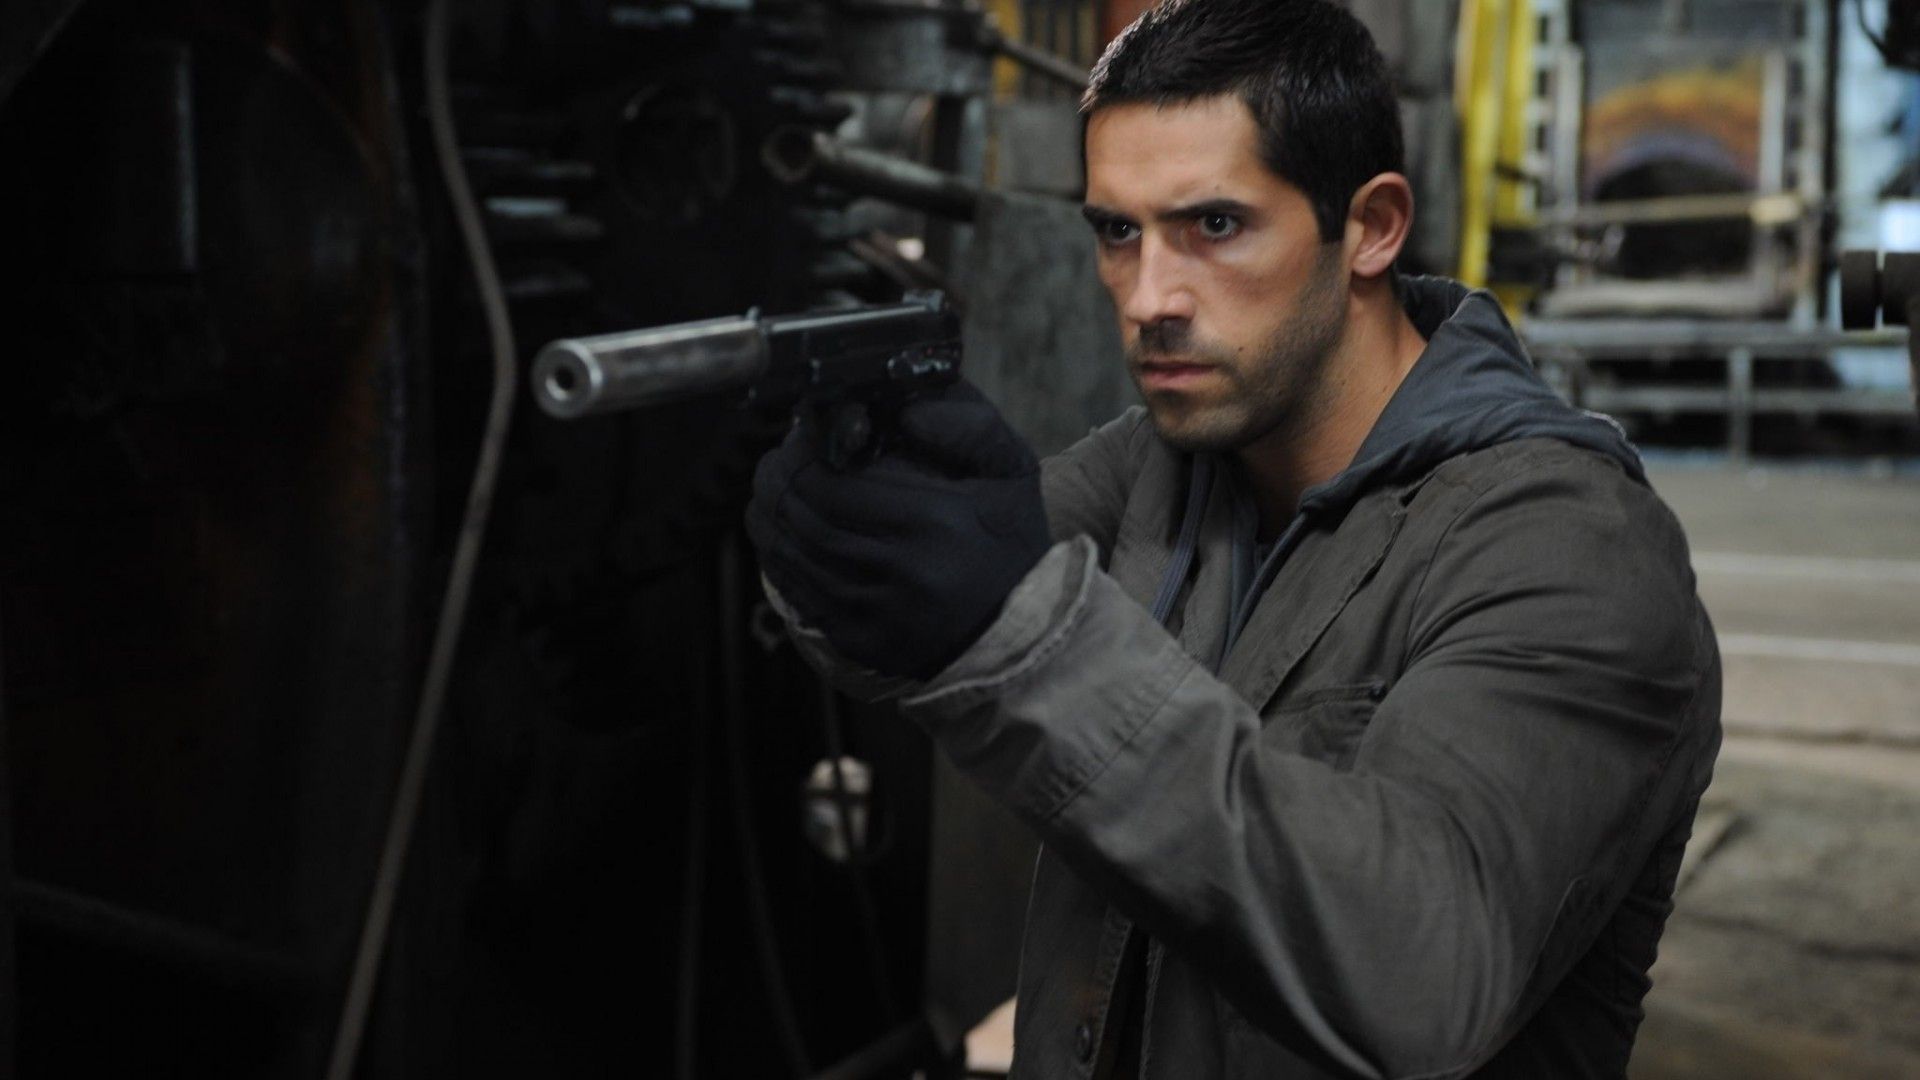 Movie Actor Scott Adkins wallpapers and images - wallpapers